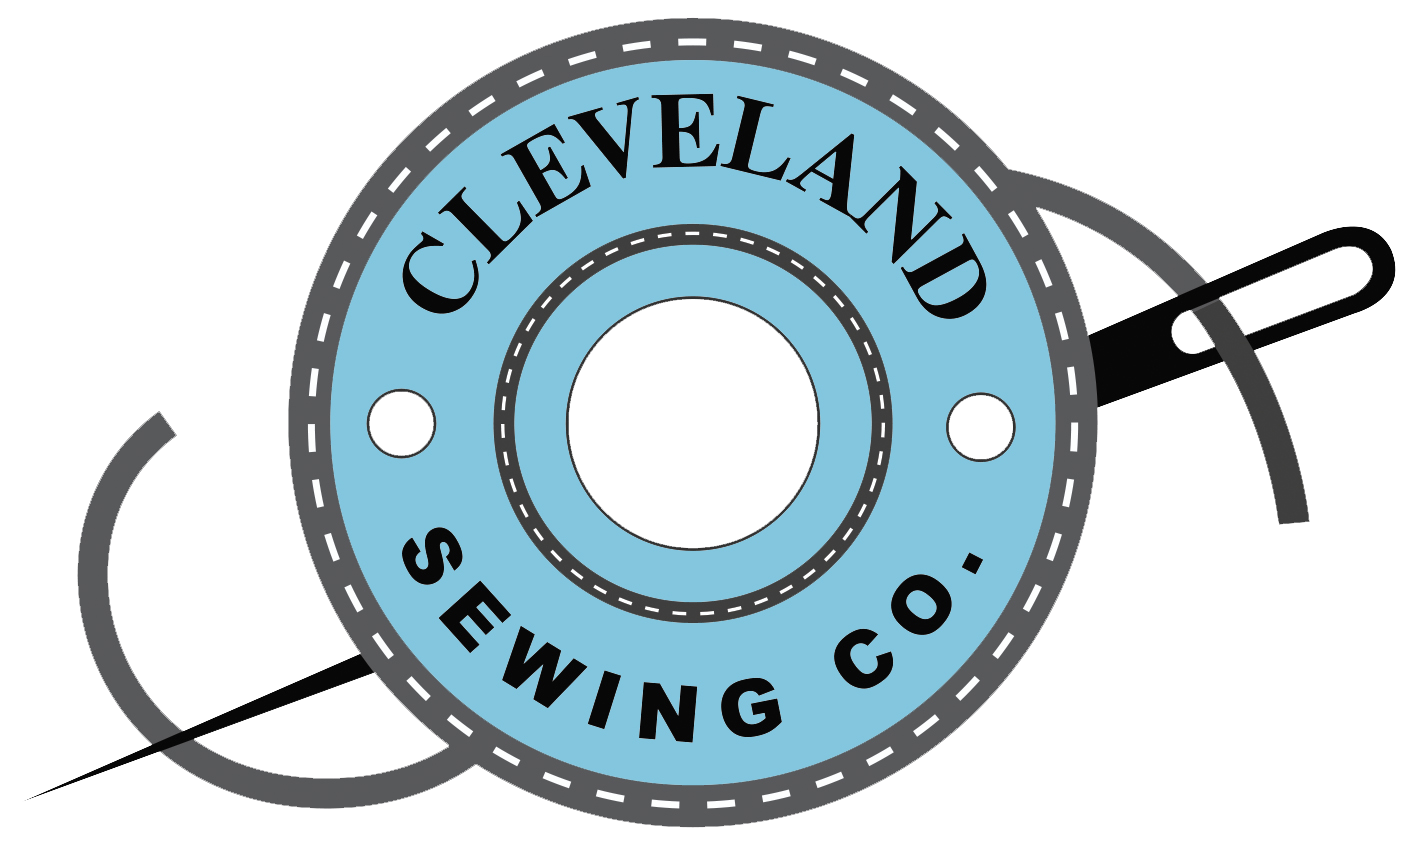 Former Cleveland Sewing company logo